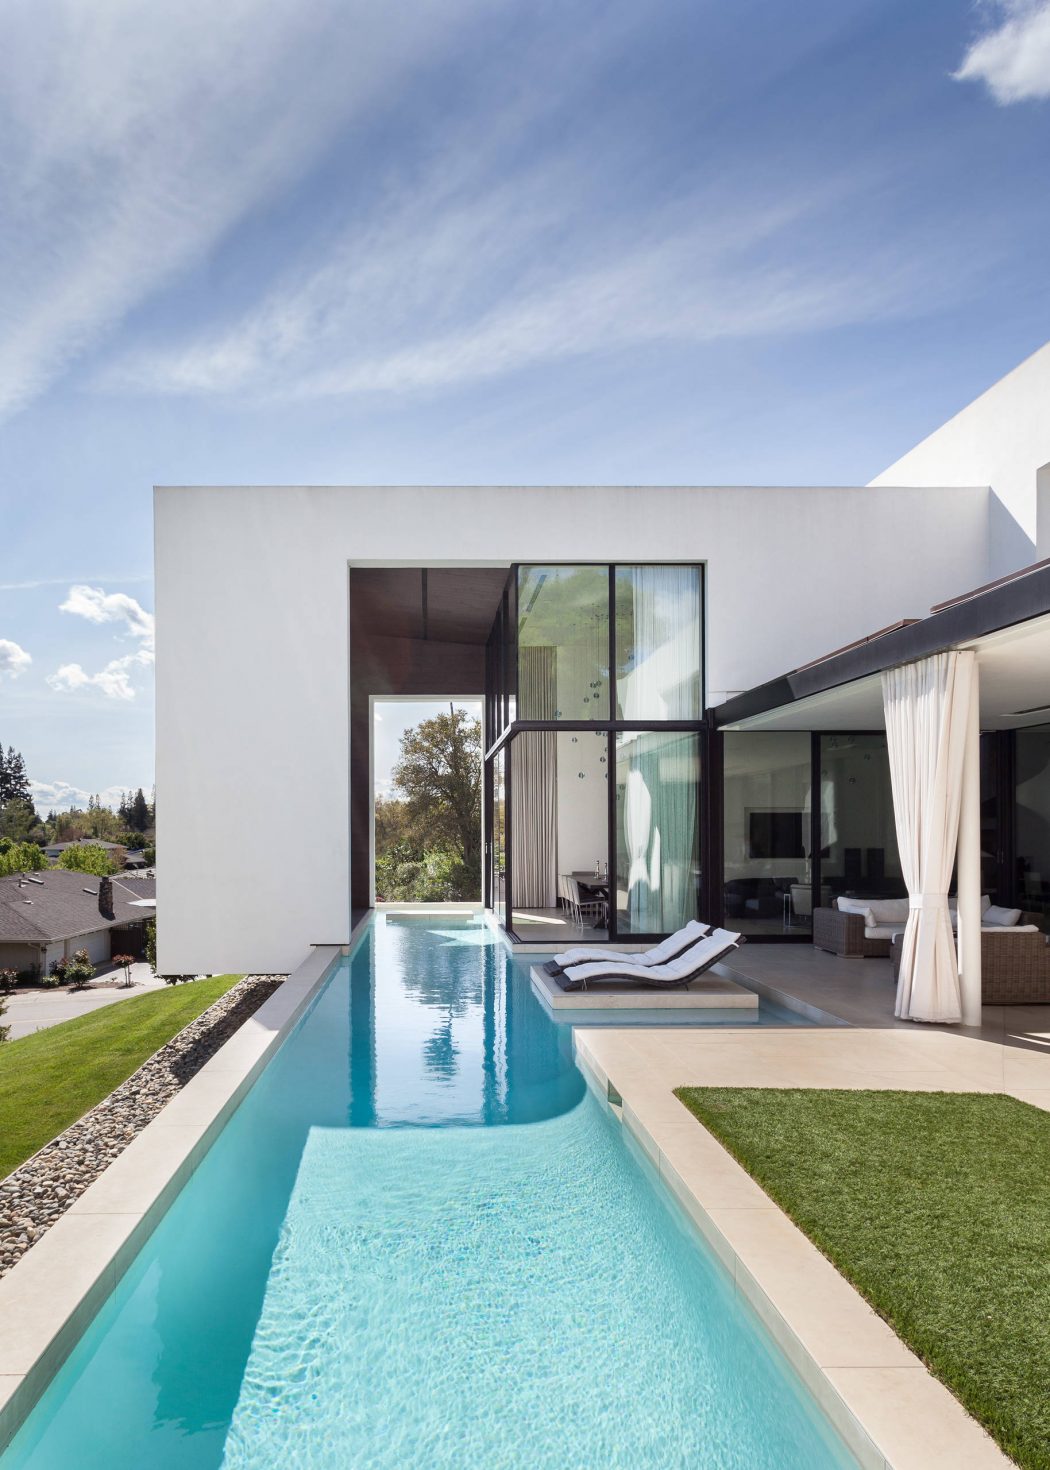 Sleek, modern home with a long, narrow pool, surrounded by lush greenery and clear skies.